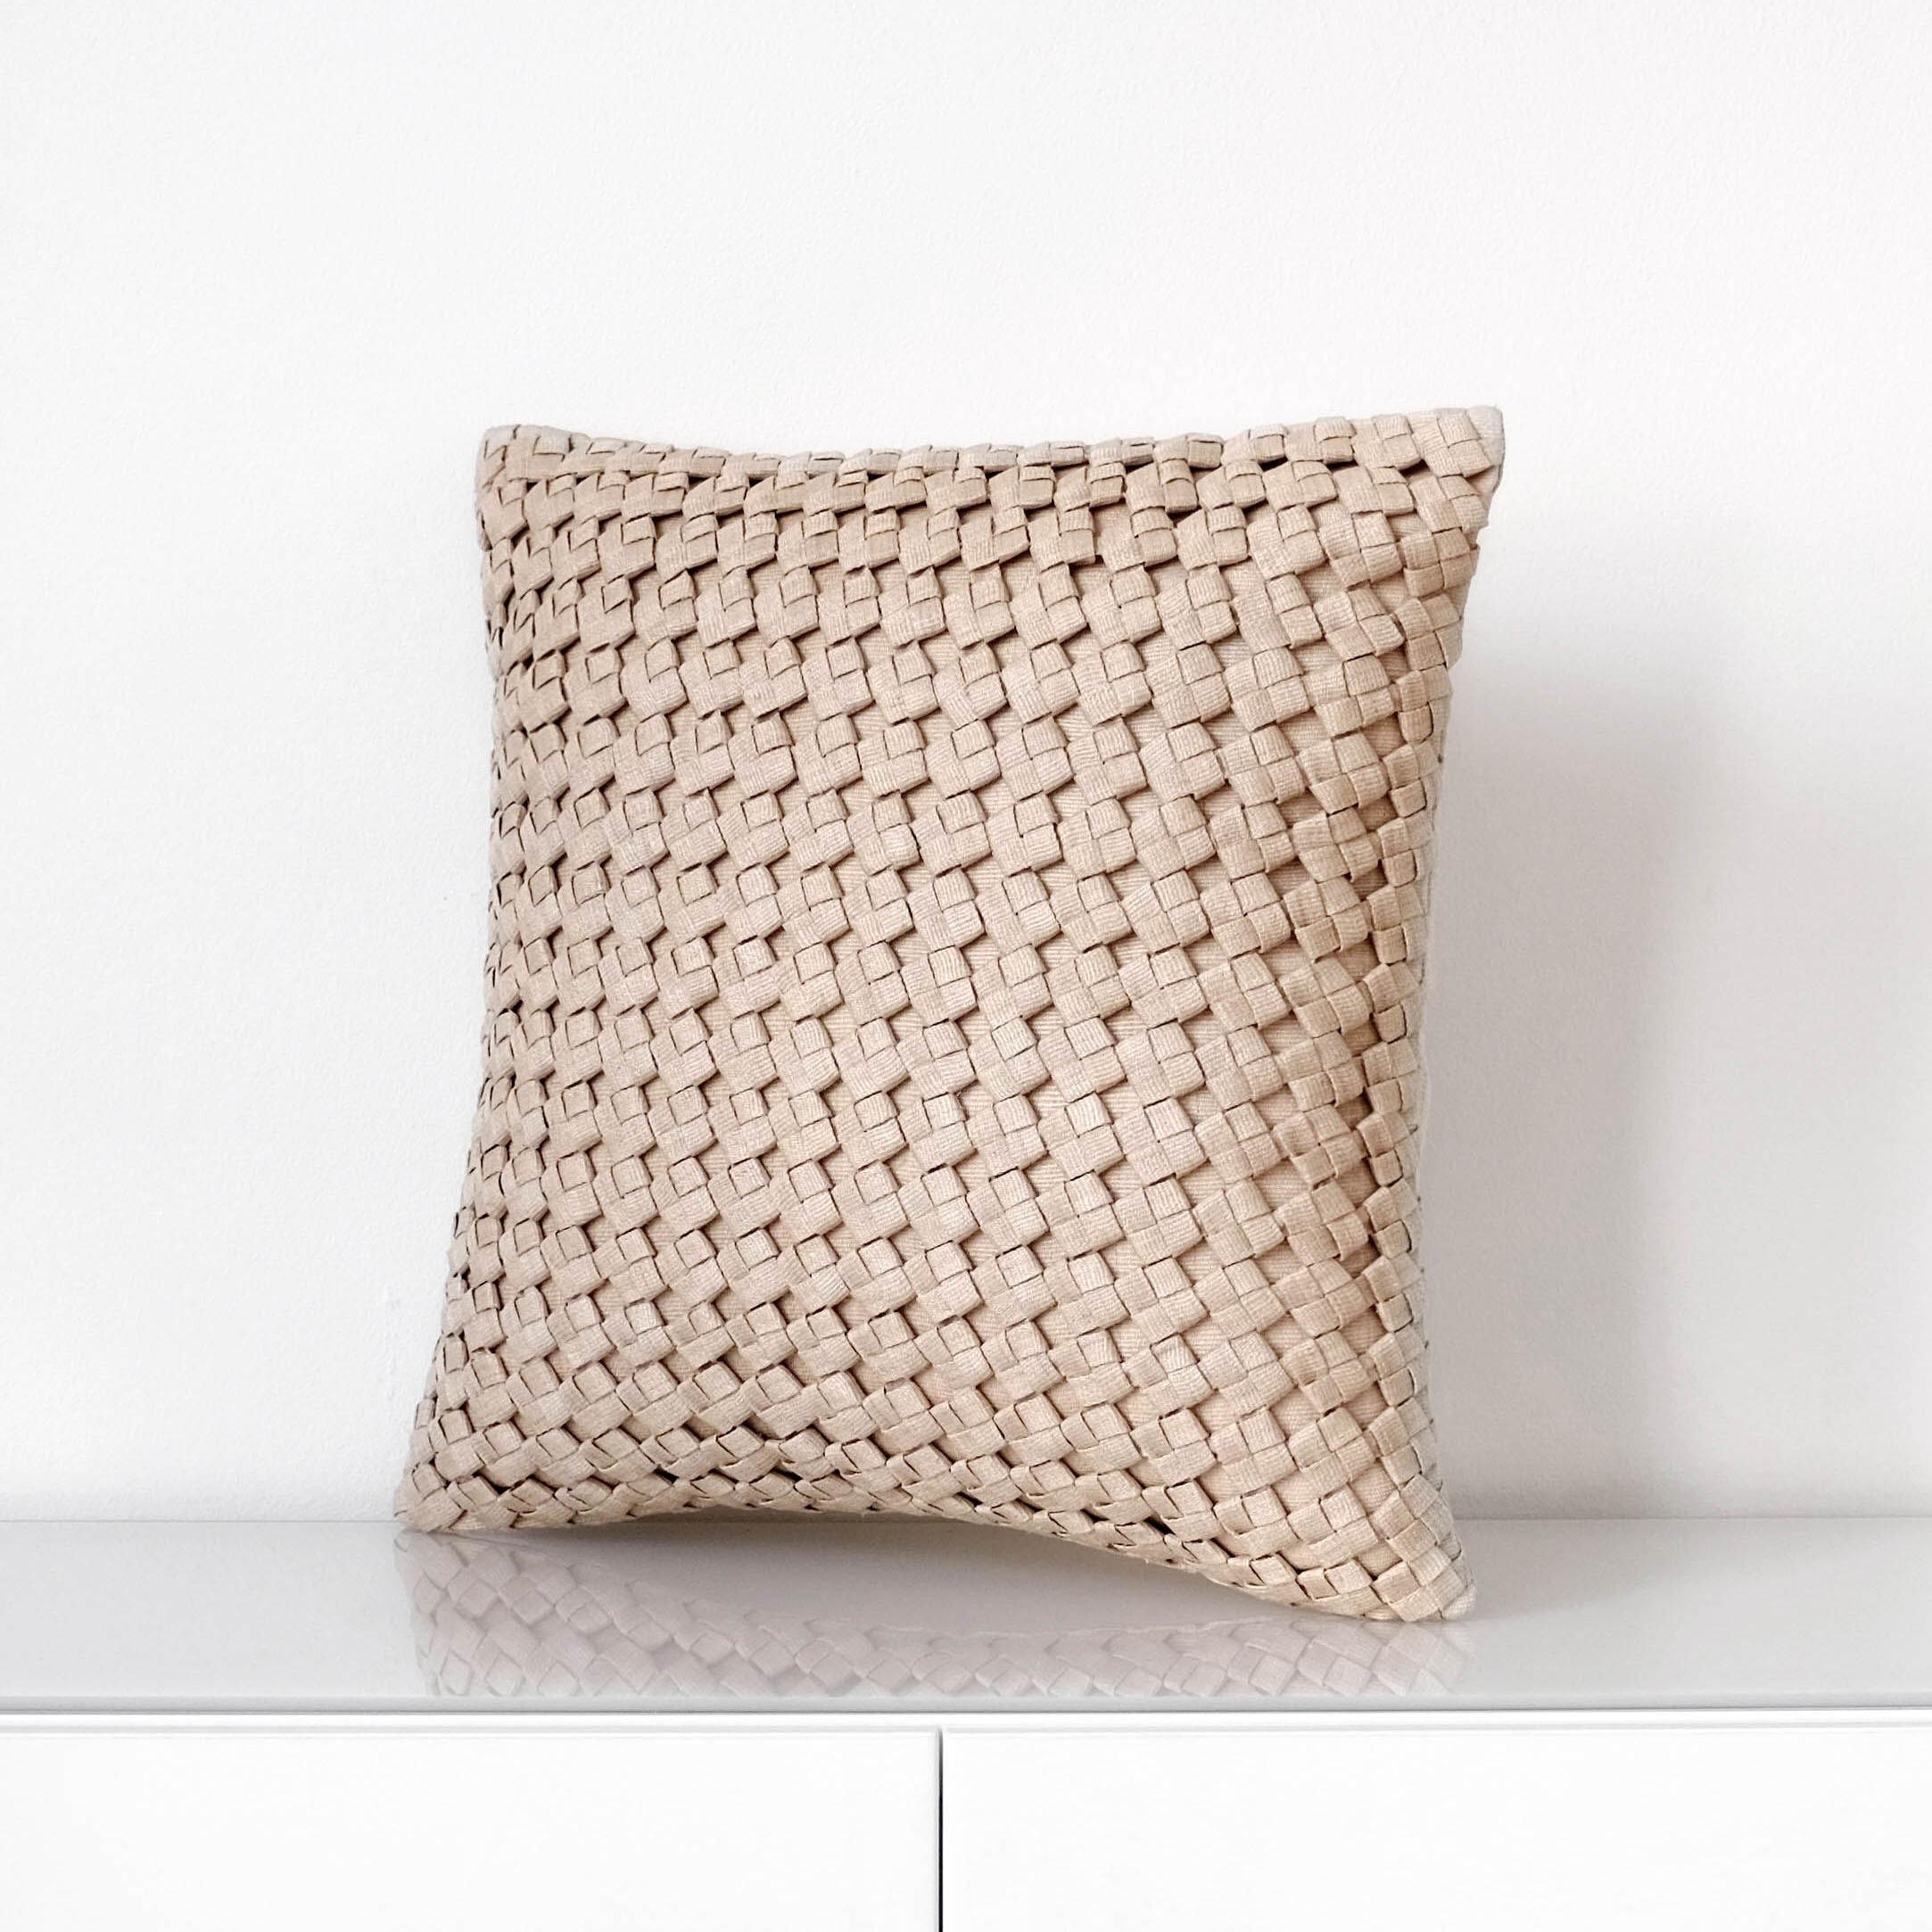 Handcrafted cushion cover made with naturally dyed and delicately woven T’nalak cloth from Abaca fibres and fastened with coconut shell buttons
Colour: light sand

Measures: 50 x 50 cm
19.7? x 19.7?
Recommended cushion filler: 61 x 61 cm / 24?